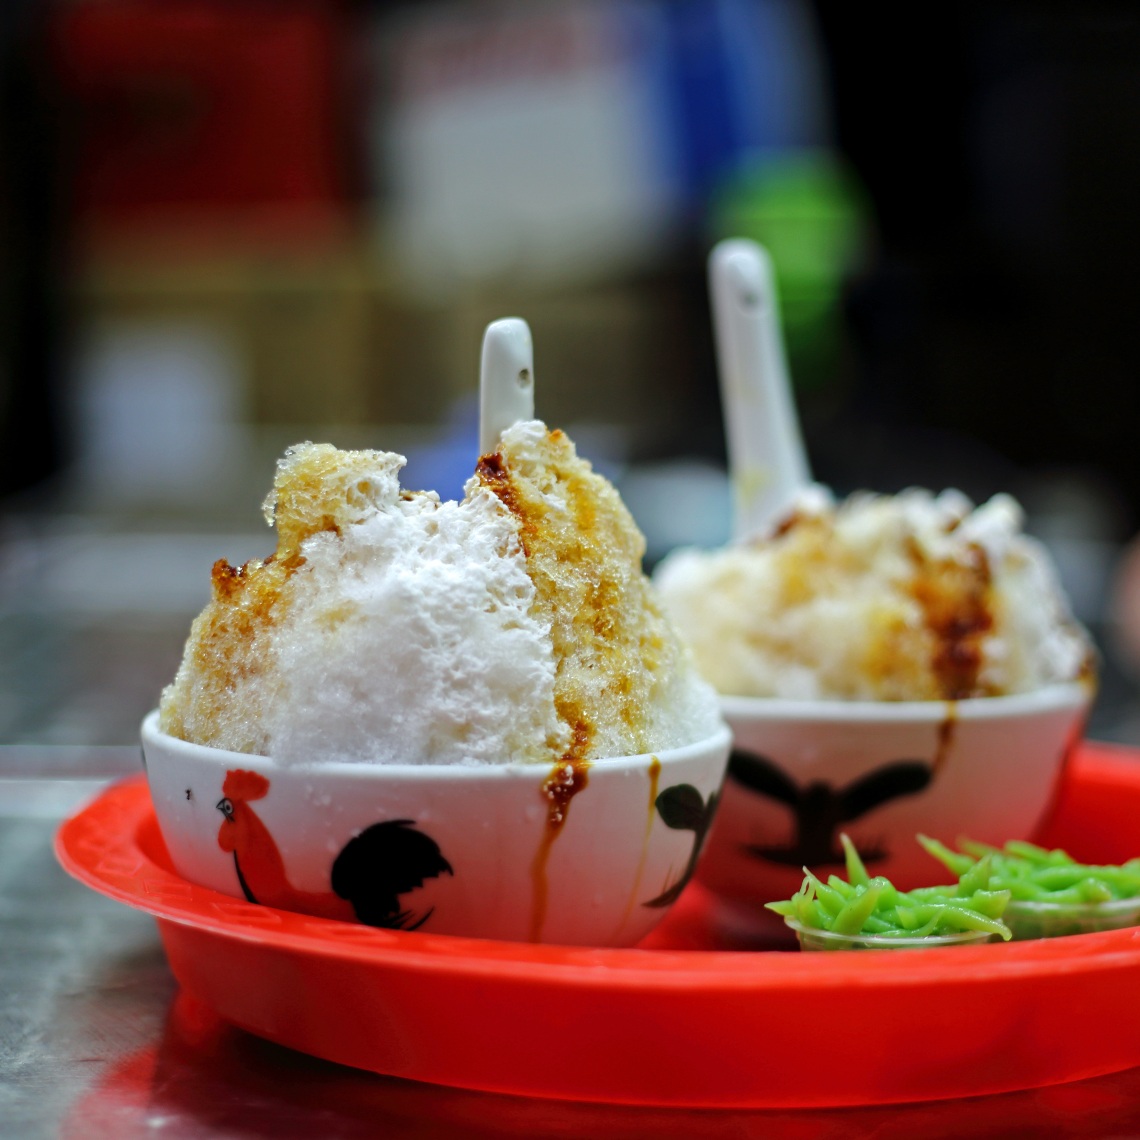 Chendol, an iced dessert made from rice flour and pandan jelly with coconut milk and palm sugar